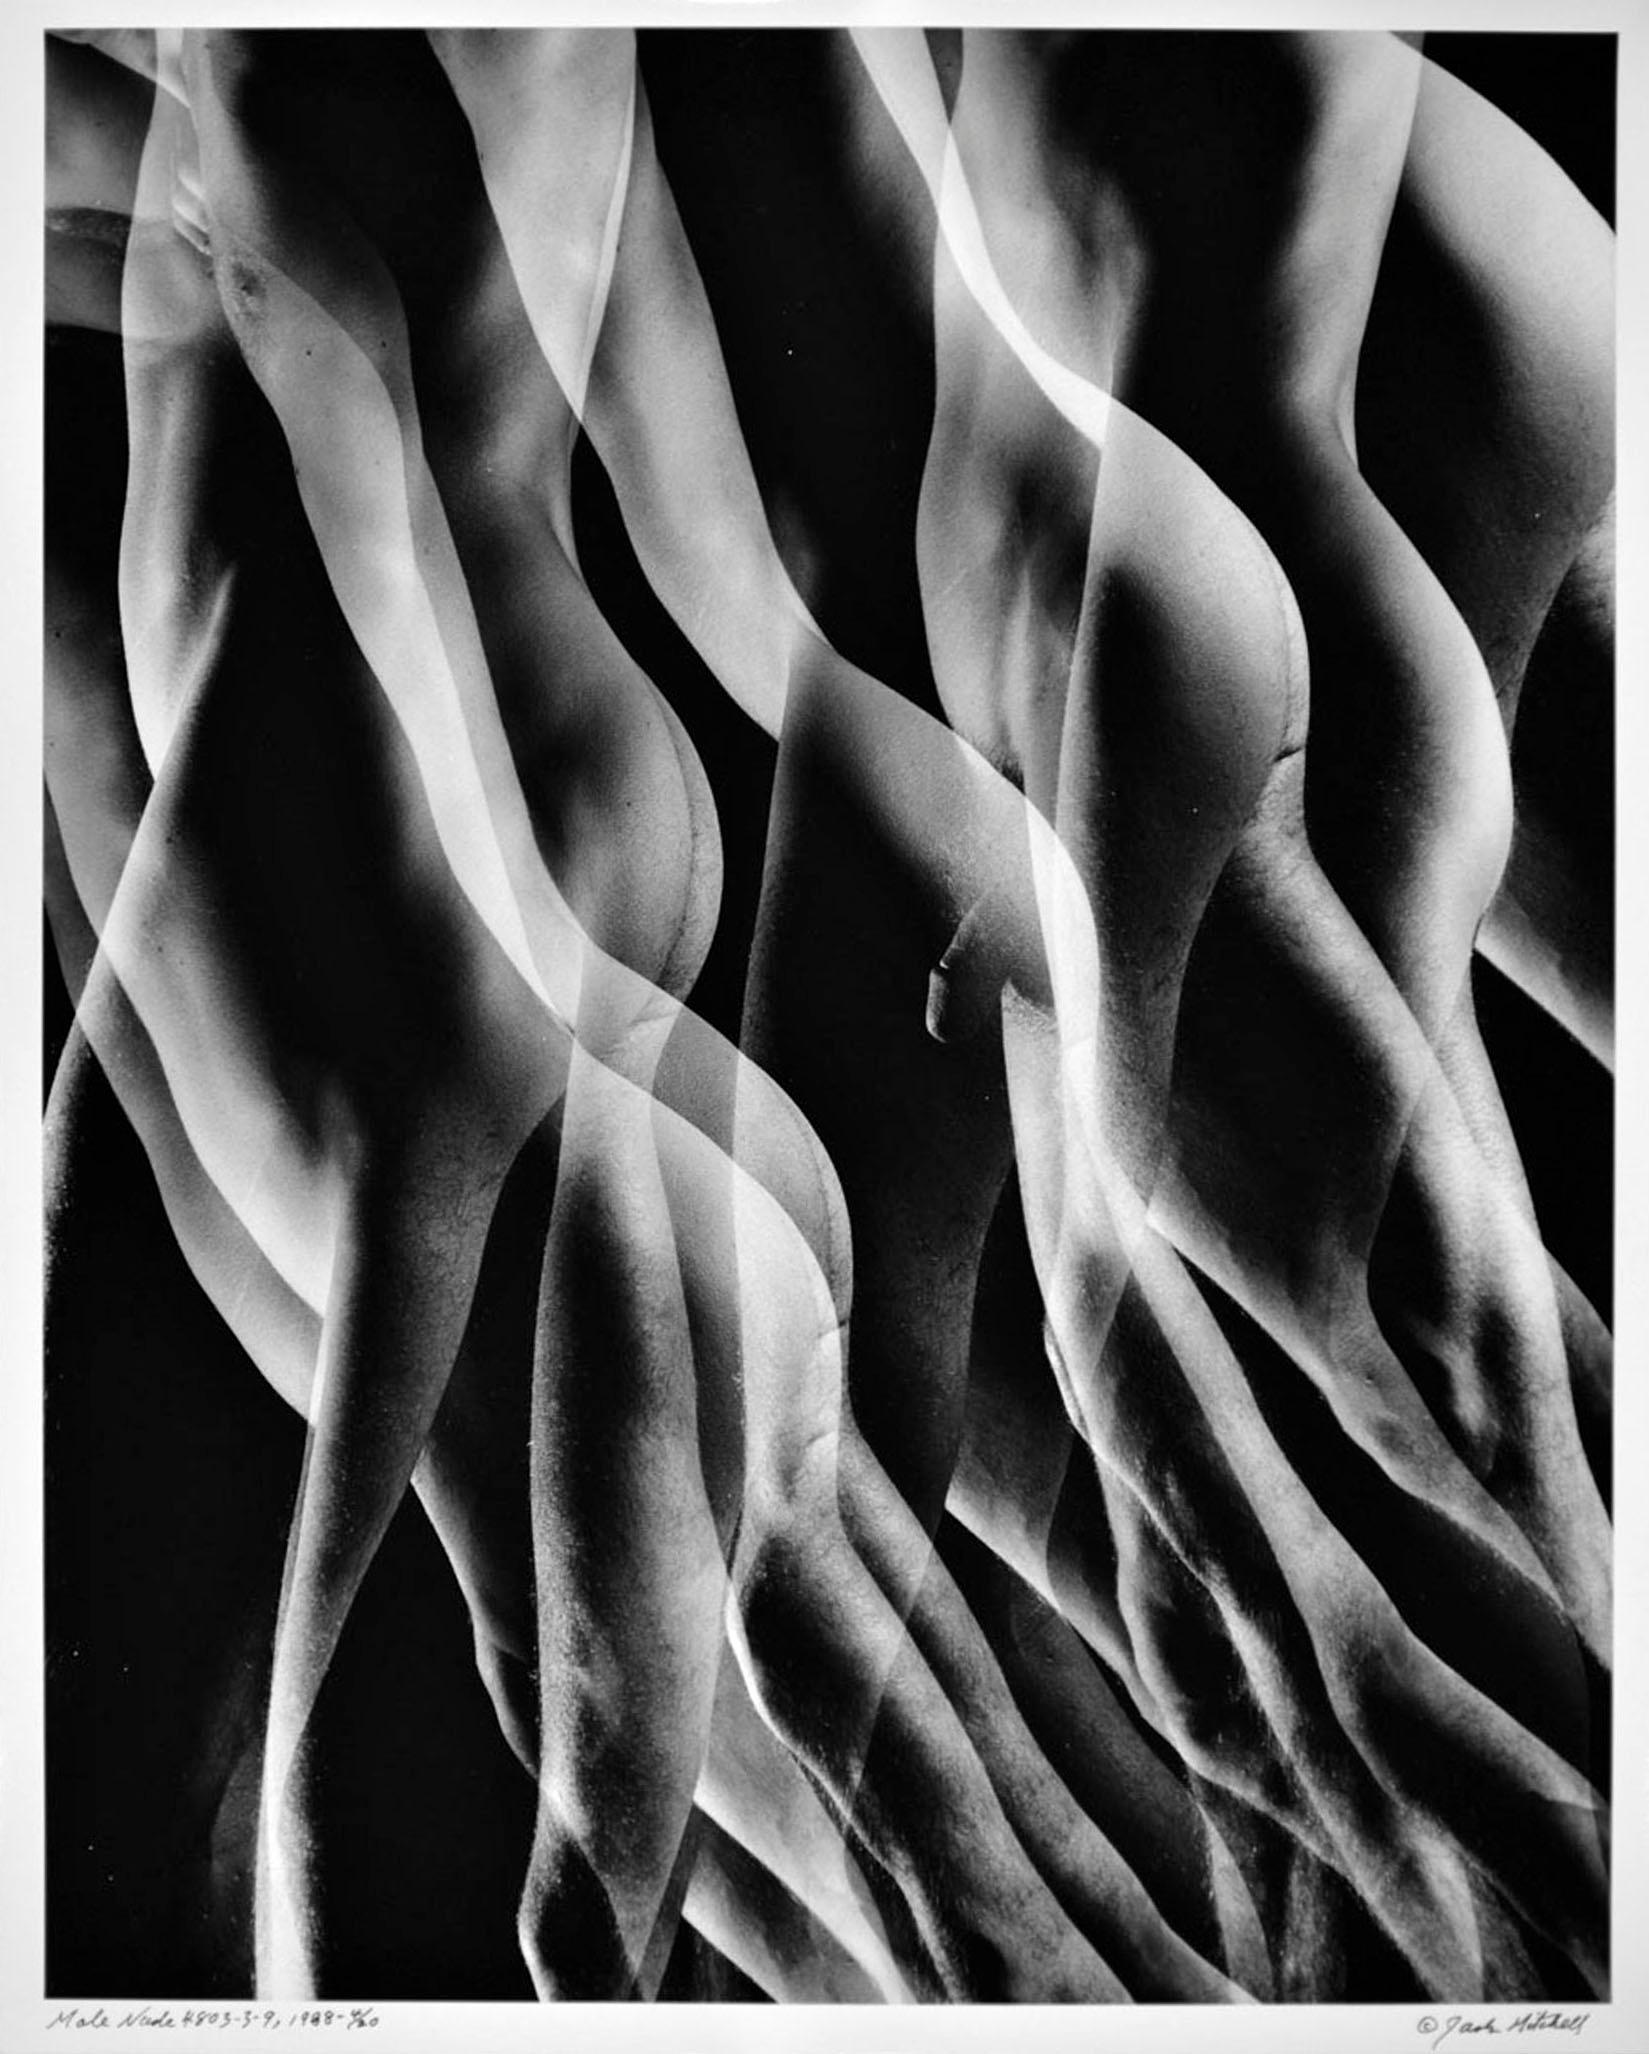 16 x 20" vintage silver gelatin photograph, multiple exposure male nude. Titled, numbered, dated, and signed by Jack Mitchell on the recto. Comes directly from the Jack Mitchell Archives with a certificate of authenticity.

Jack Mitchell's artist’s